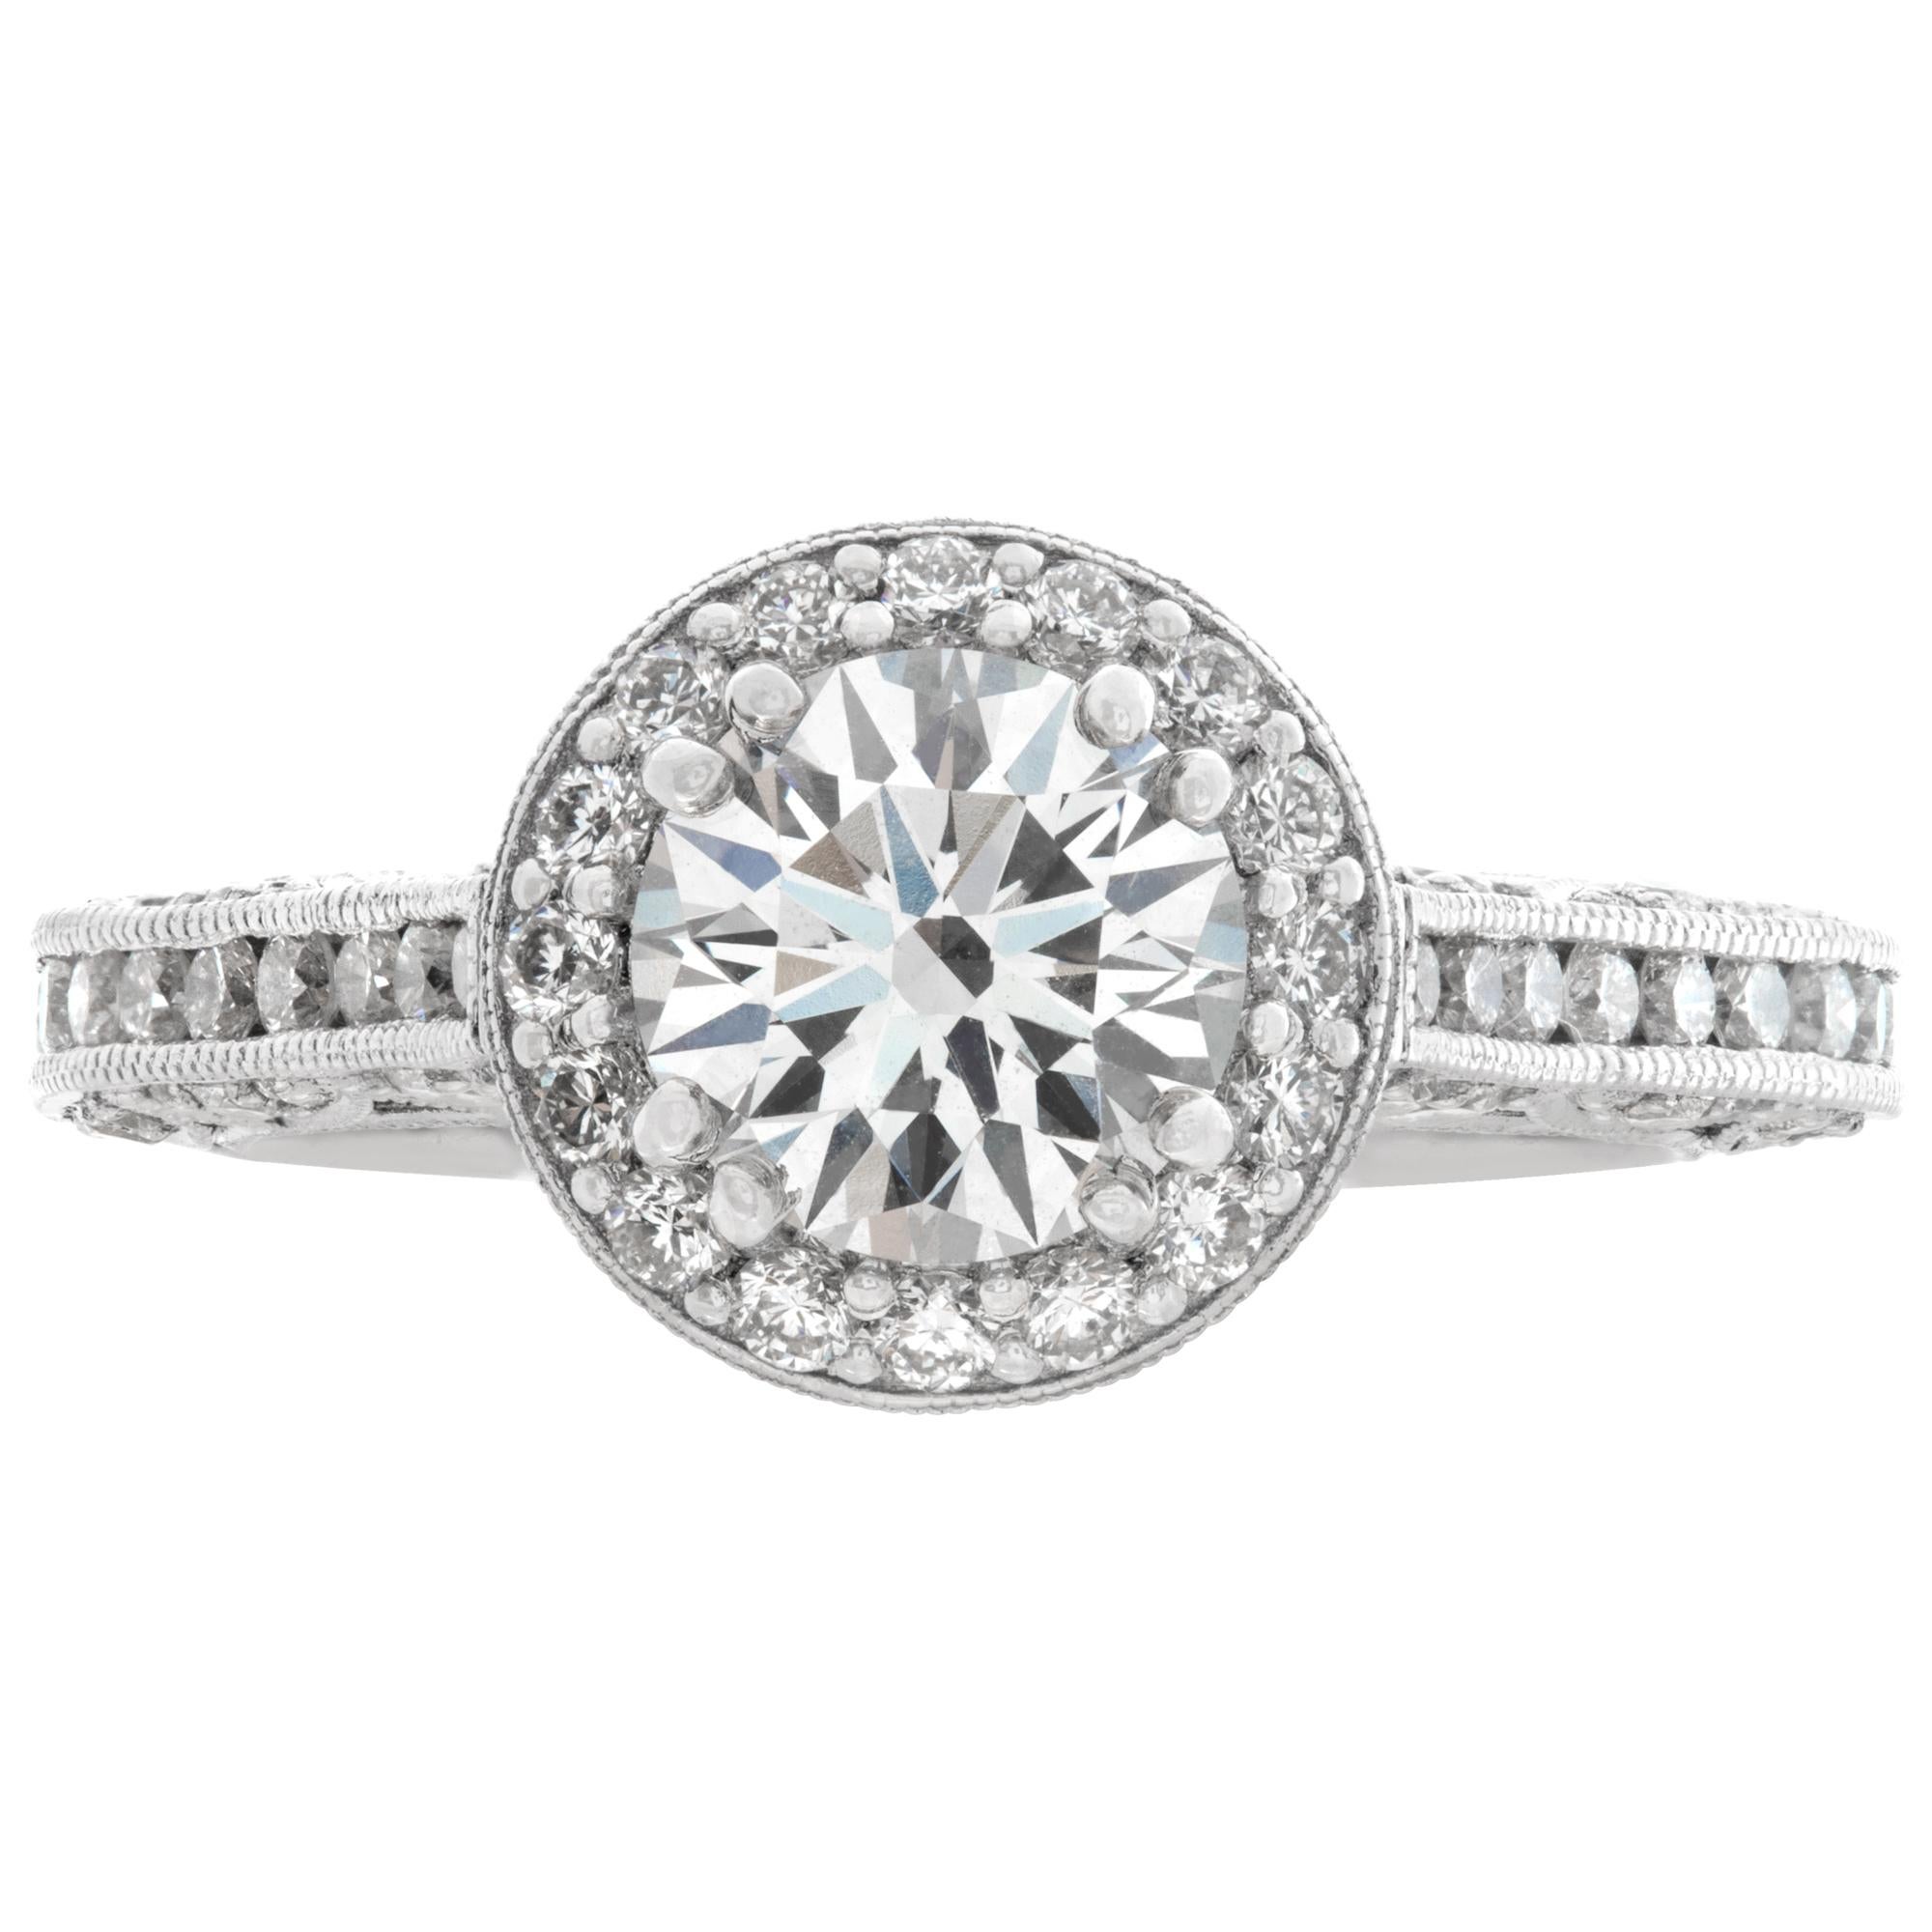 GIA certified round brilliant cut diamond 1.02 carat (G color, Internally Flawless clarity) ring set in Tacori platinum diamond filagree setting with approximately 0.50 carats in diamonds. Size 4.5.This GIA certified ring is currently size 4.5 and